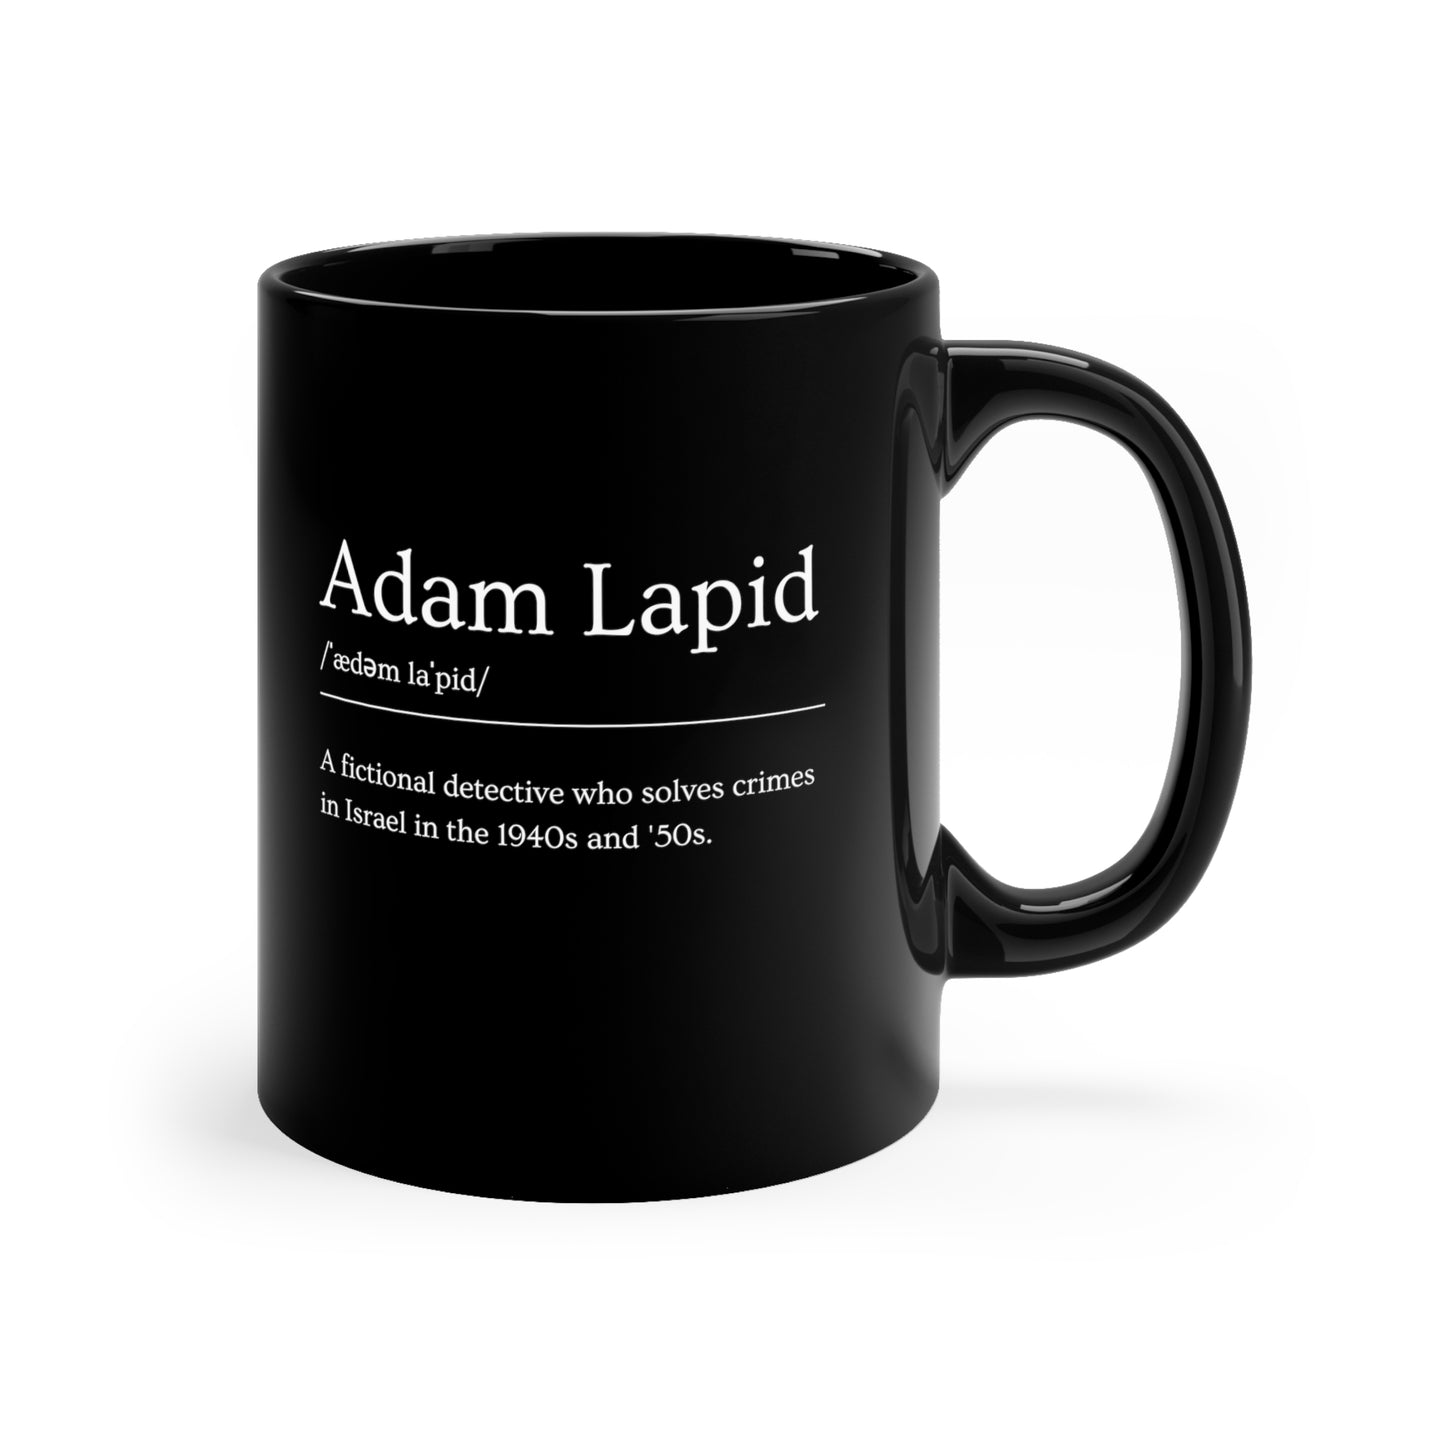 11oz Black Mug with a Tongue-in-Cheek Definition of Adam Lapid, Fictional PI